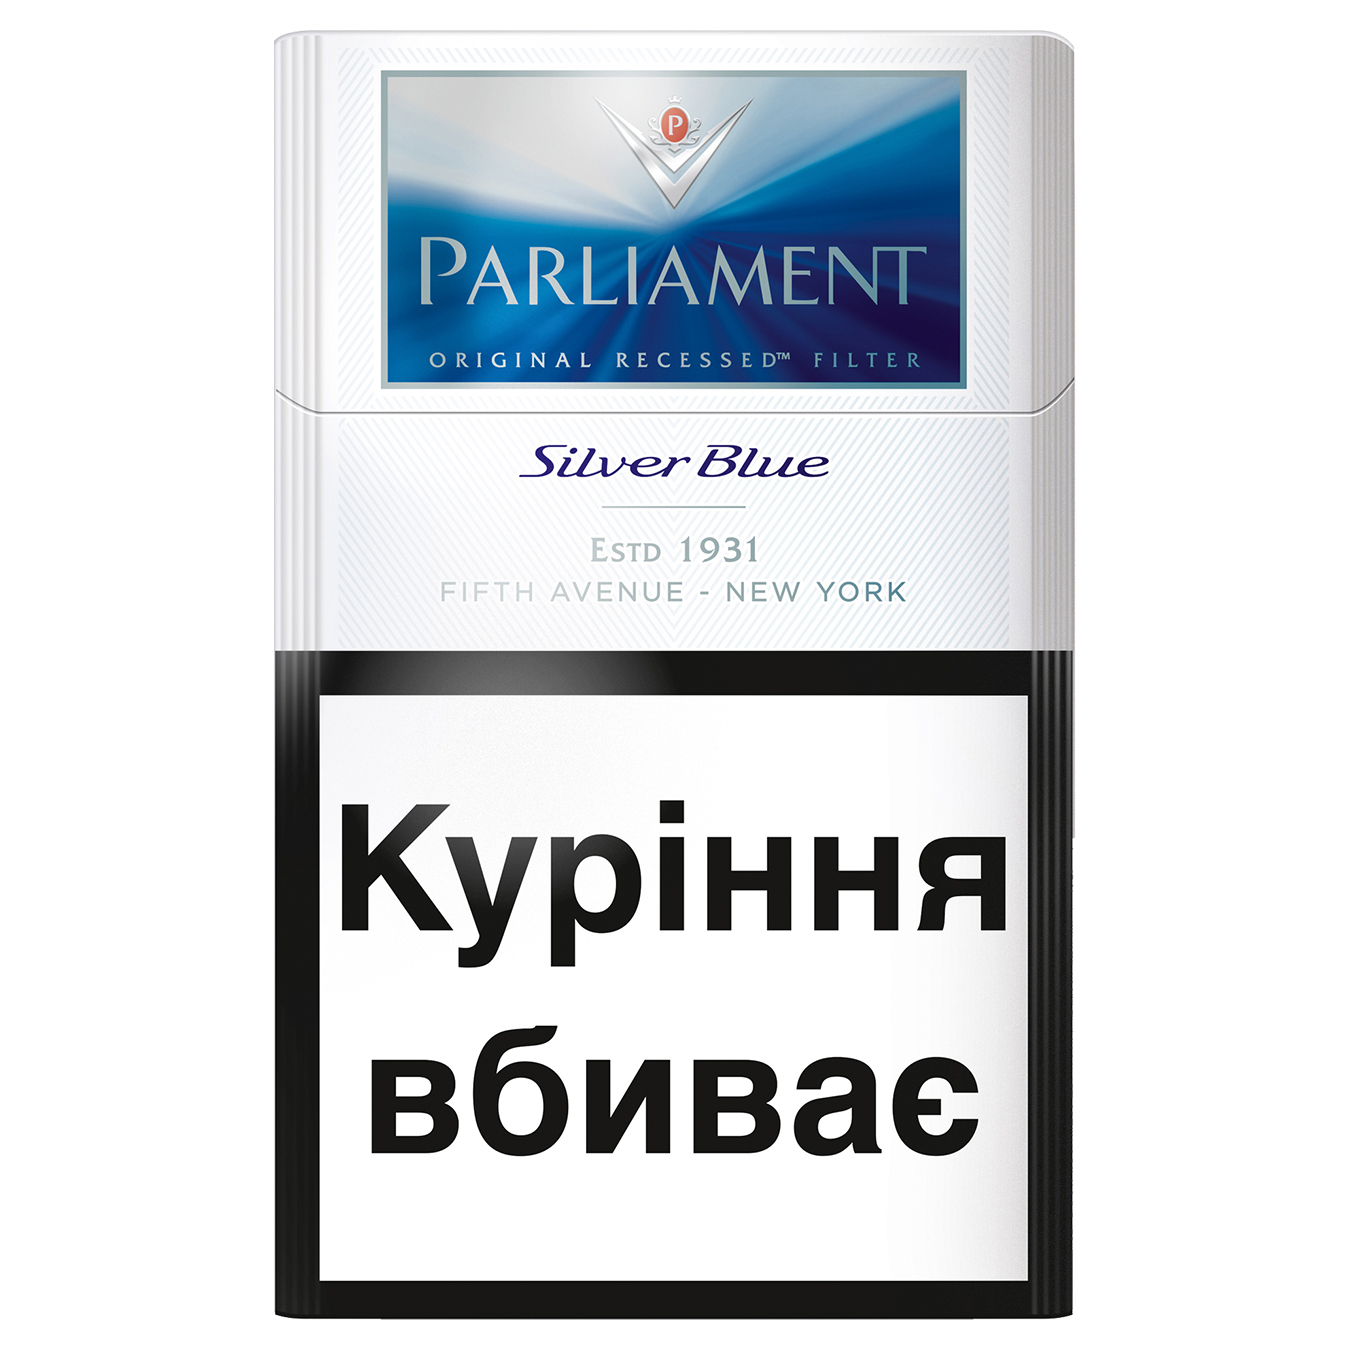 Parliament Silver Blue Cigarettes 20 pcs (the price is indicated without excise tax)